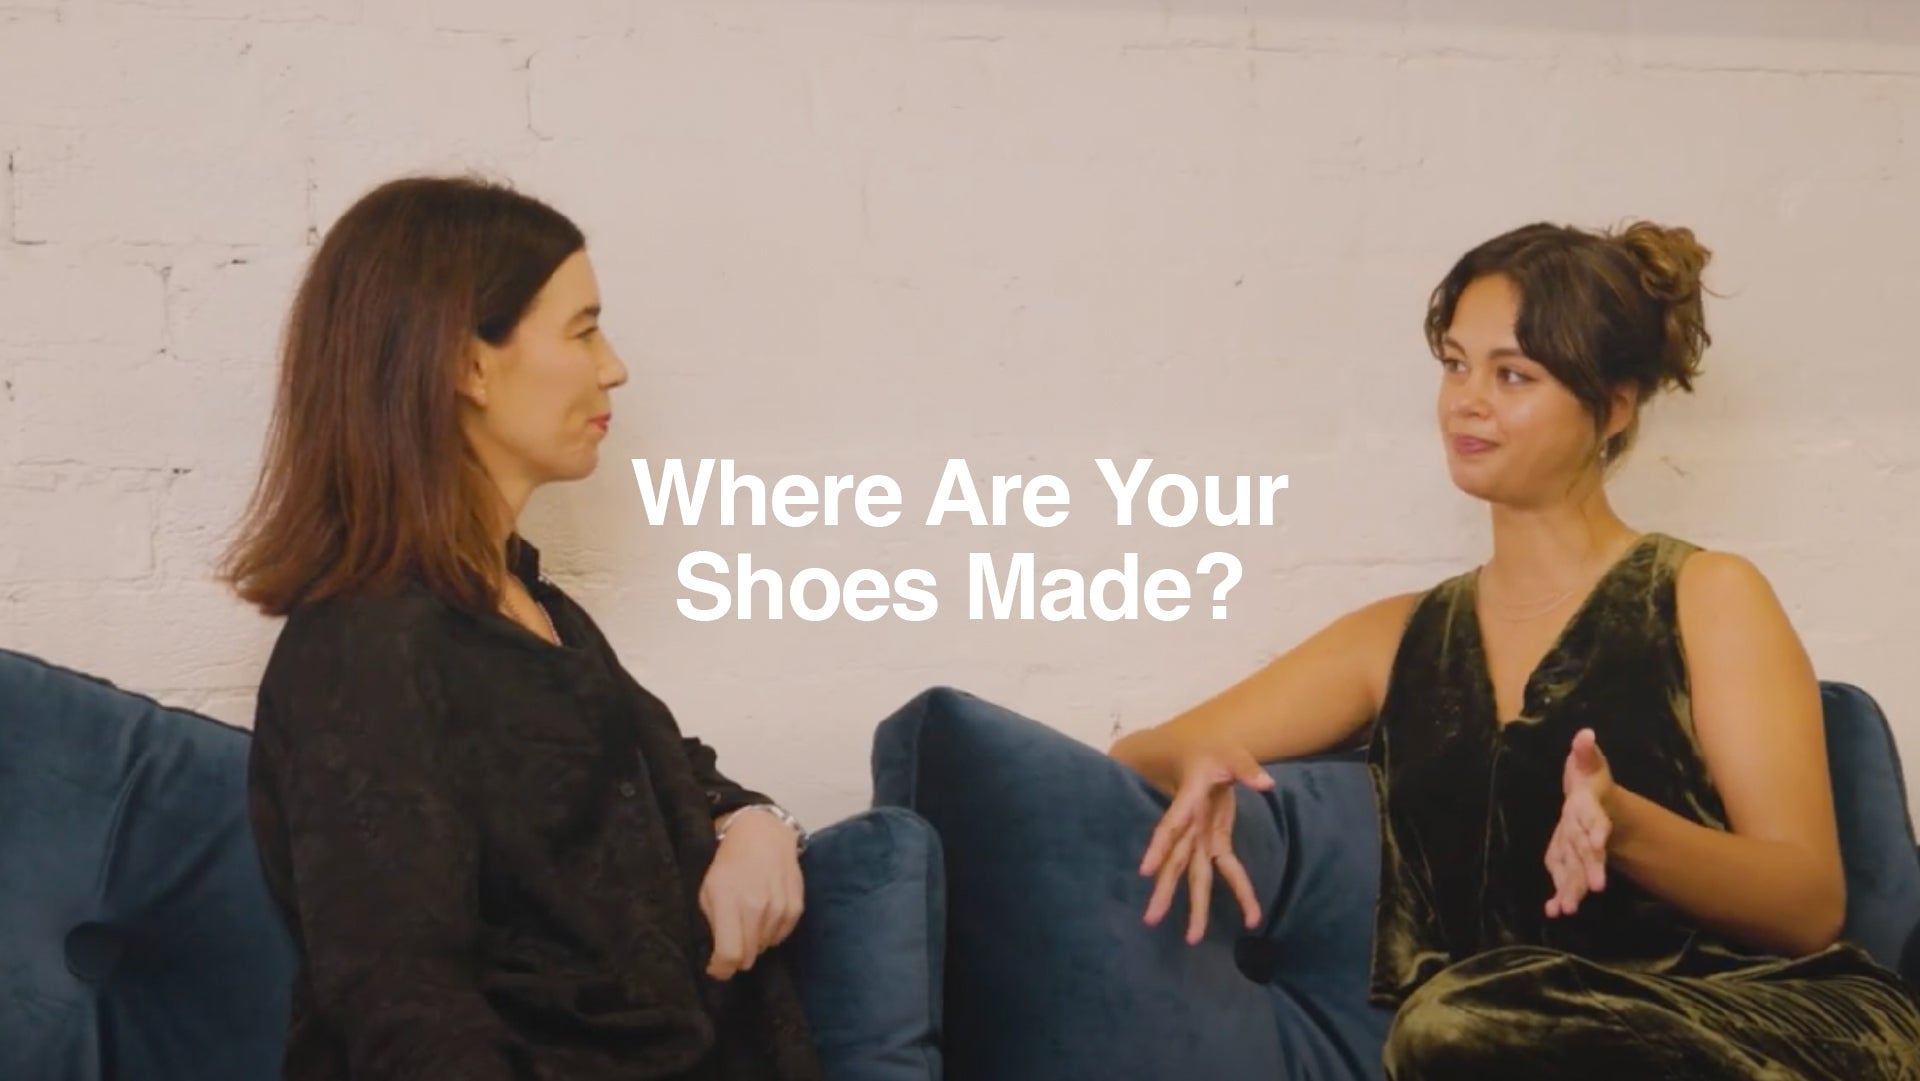 Learn All About Where Our Shoes are Responsibly Made